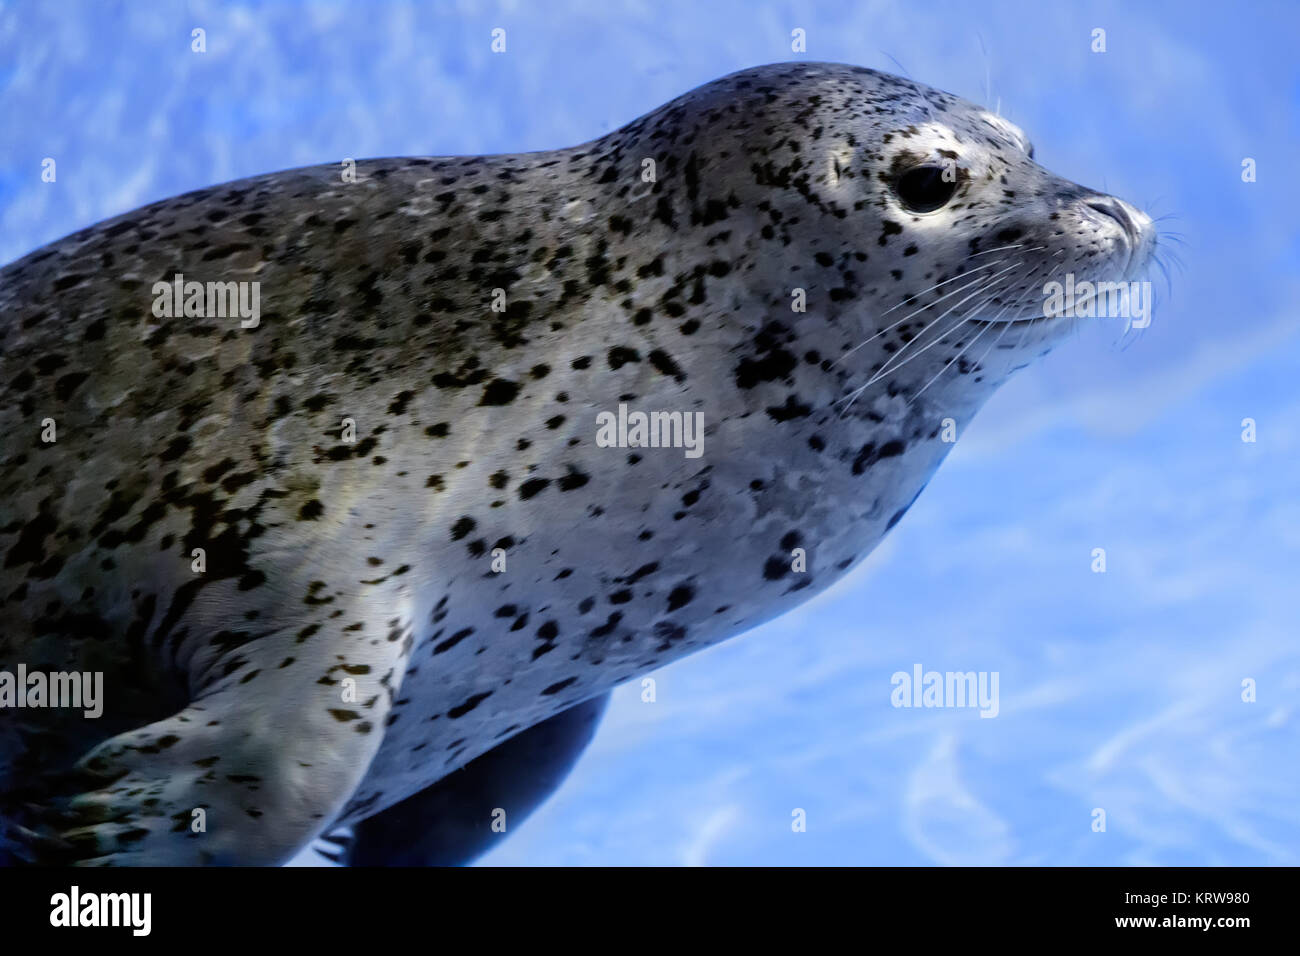 In the water floats a young seal. Stock Photo